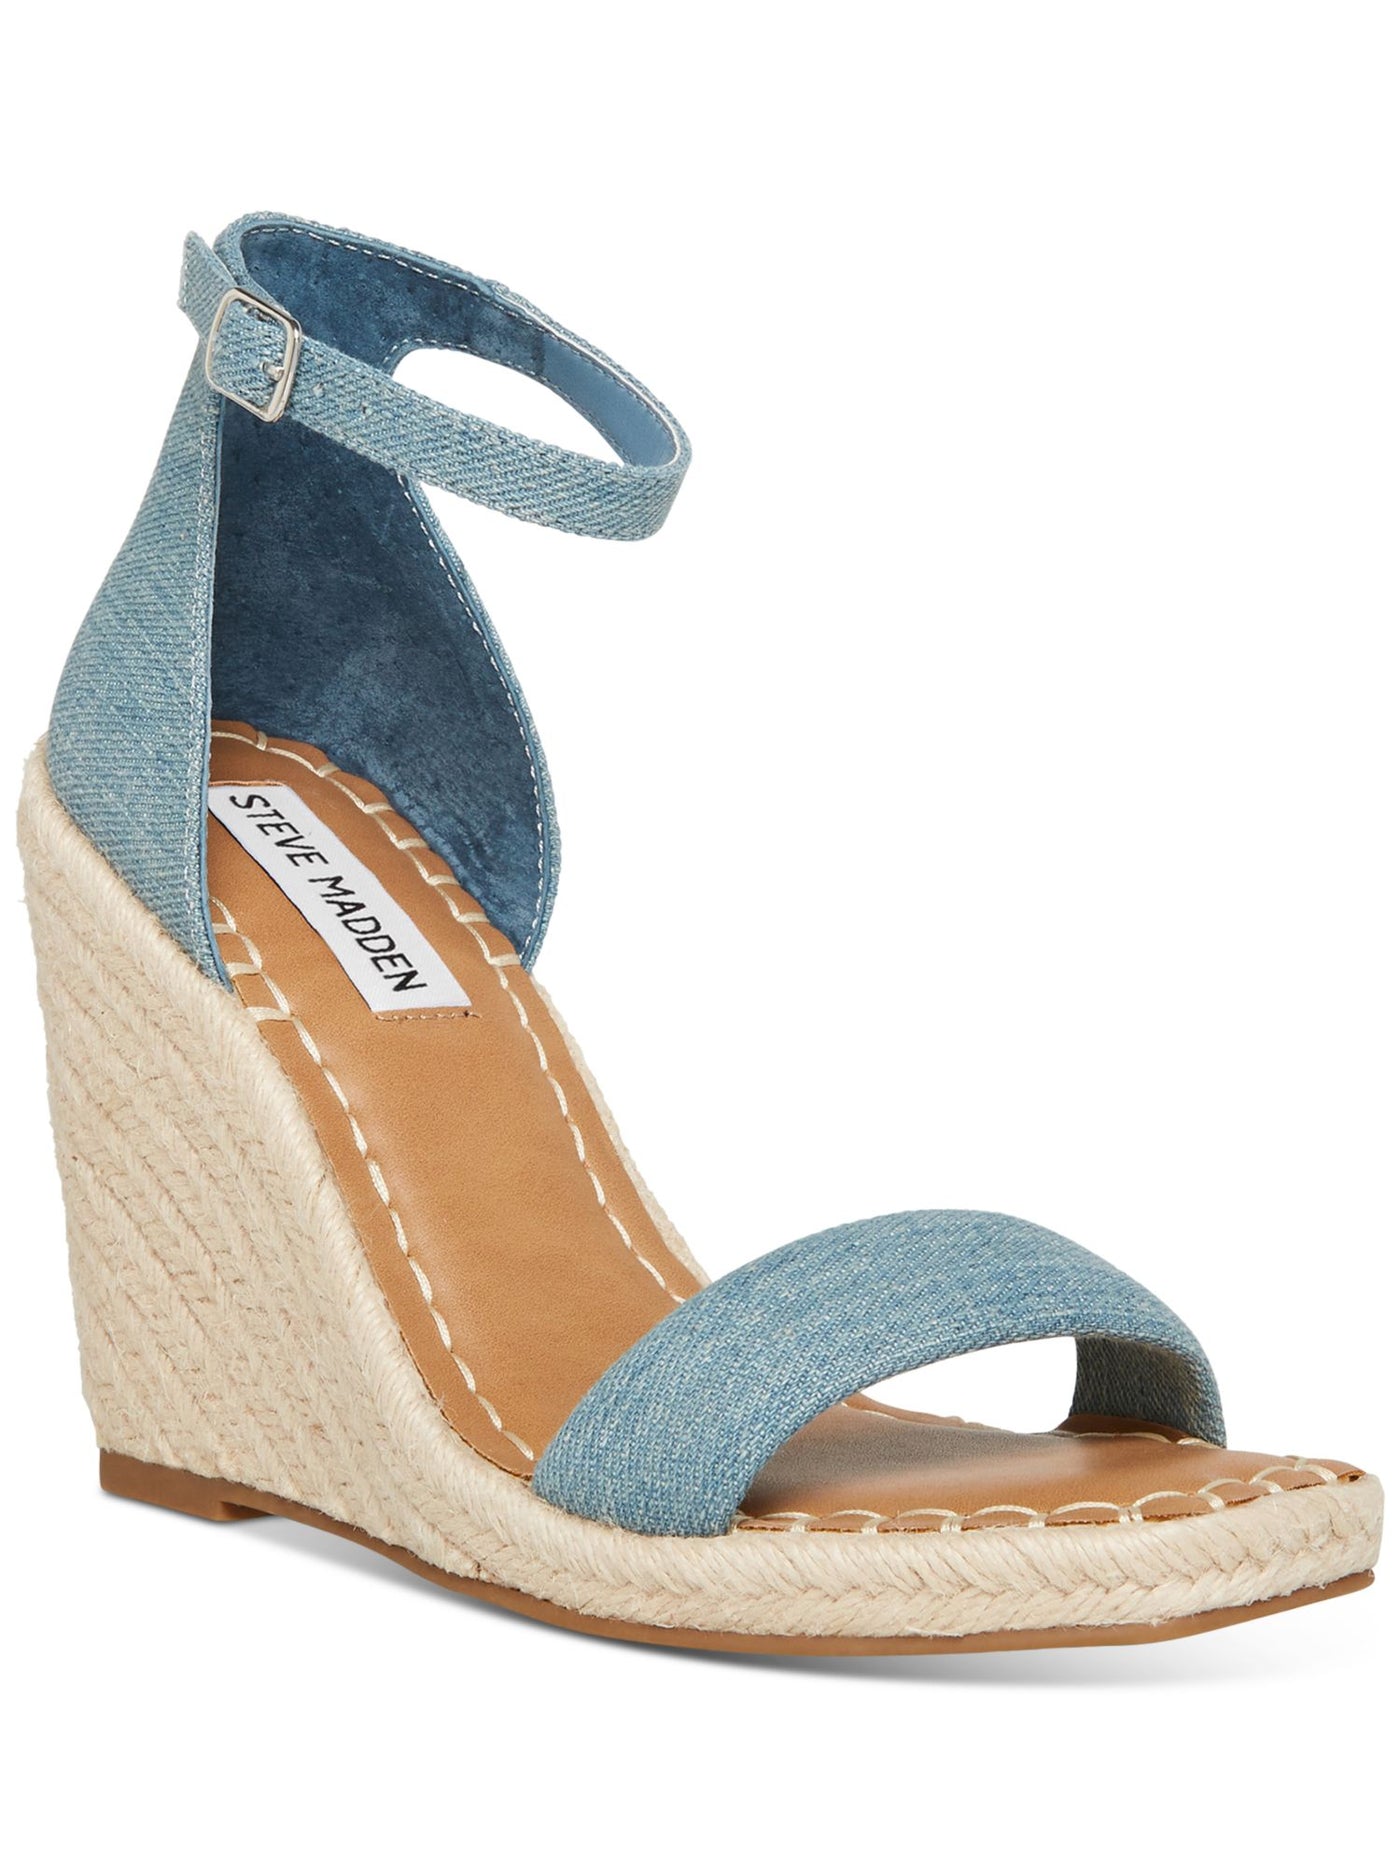 STEVE MADDEN Womens Blue Cushioned Woven 1/2" Platform Adjustable Strap Ankle Strap Submit Square Toe Wedge Buckle Espadrille Shoes 8